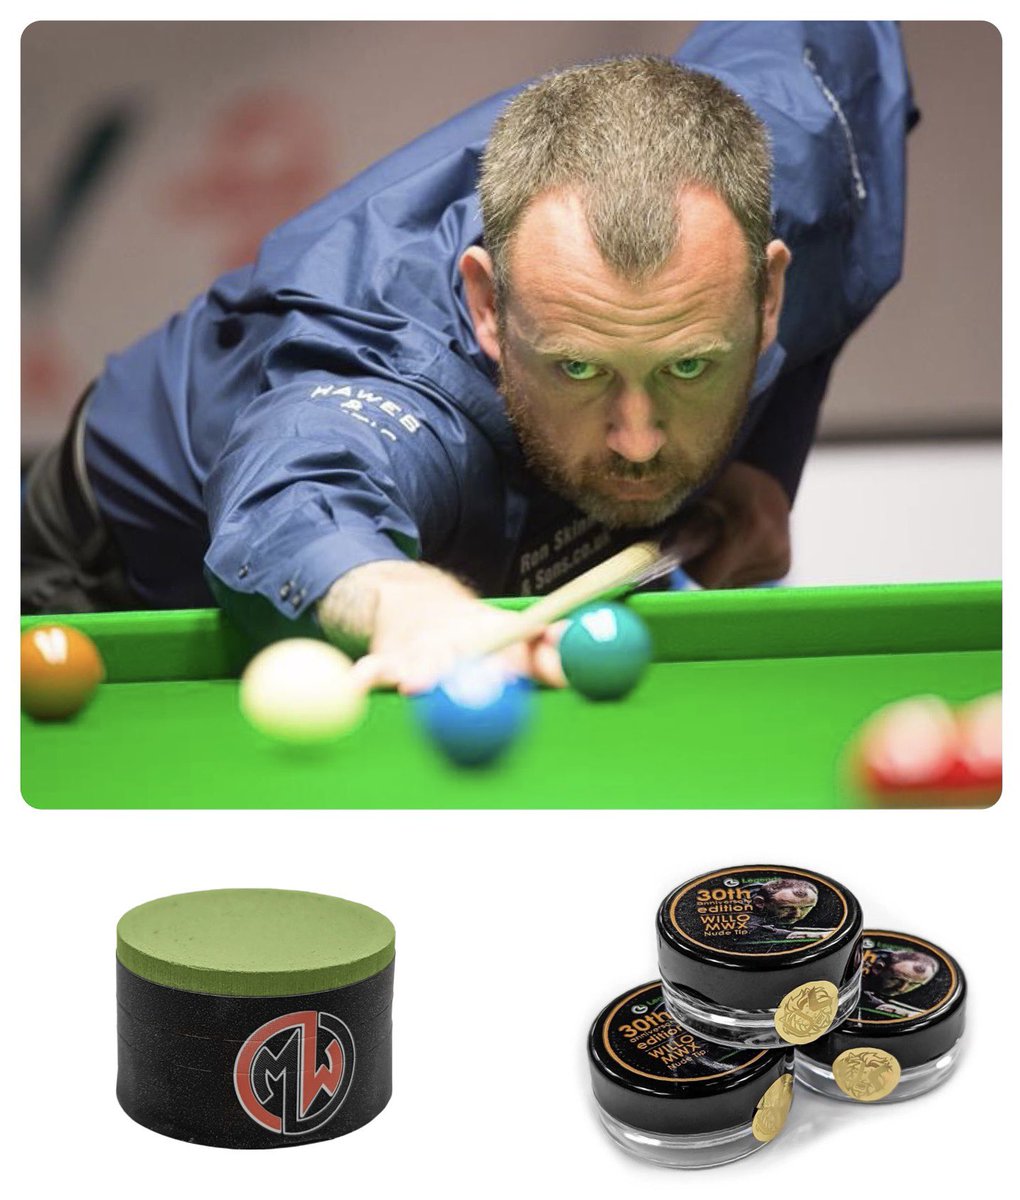 Unless you experience it for yourself it’s hard to explain the product Joy, #final all the best to @markwil147 from all at Legend’s Tips. @Snookerlegends the best hardest tips in the game